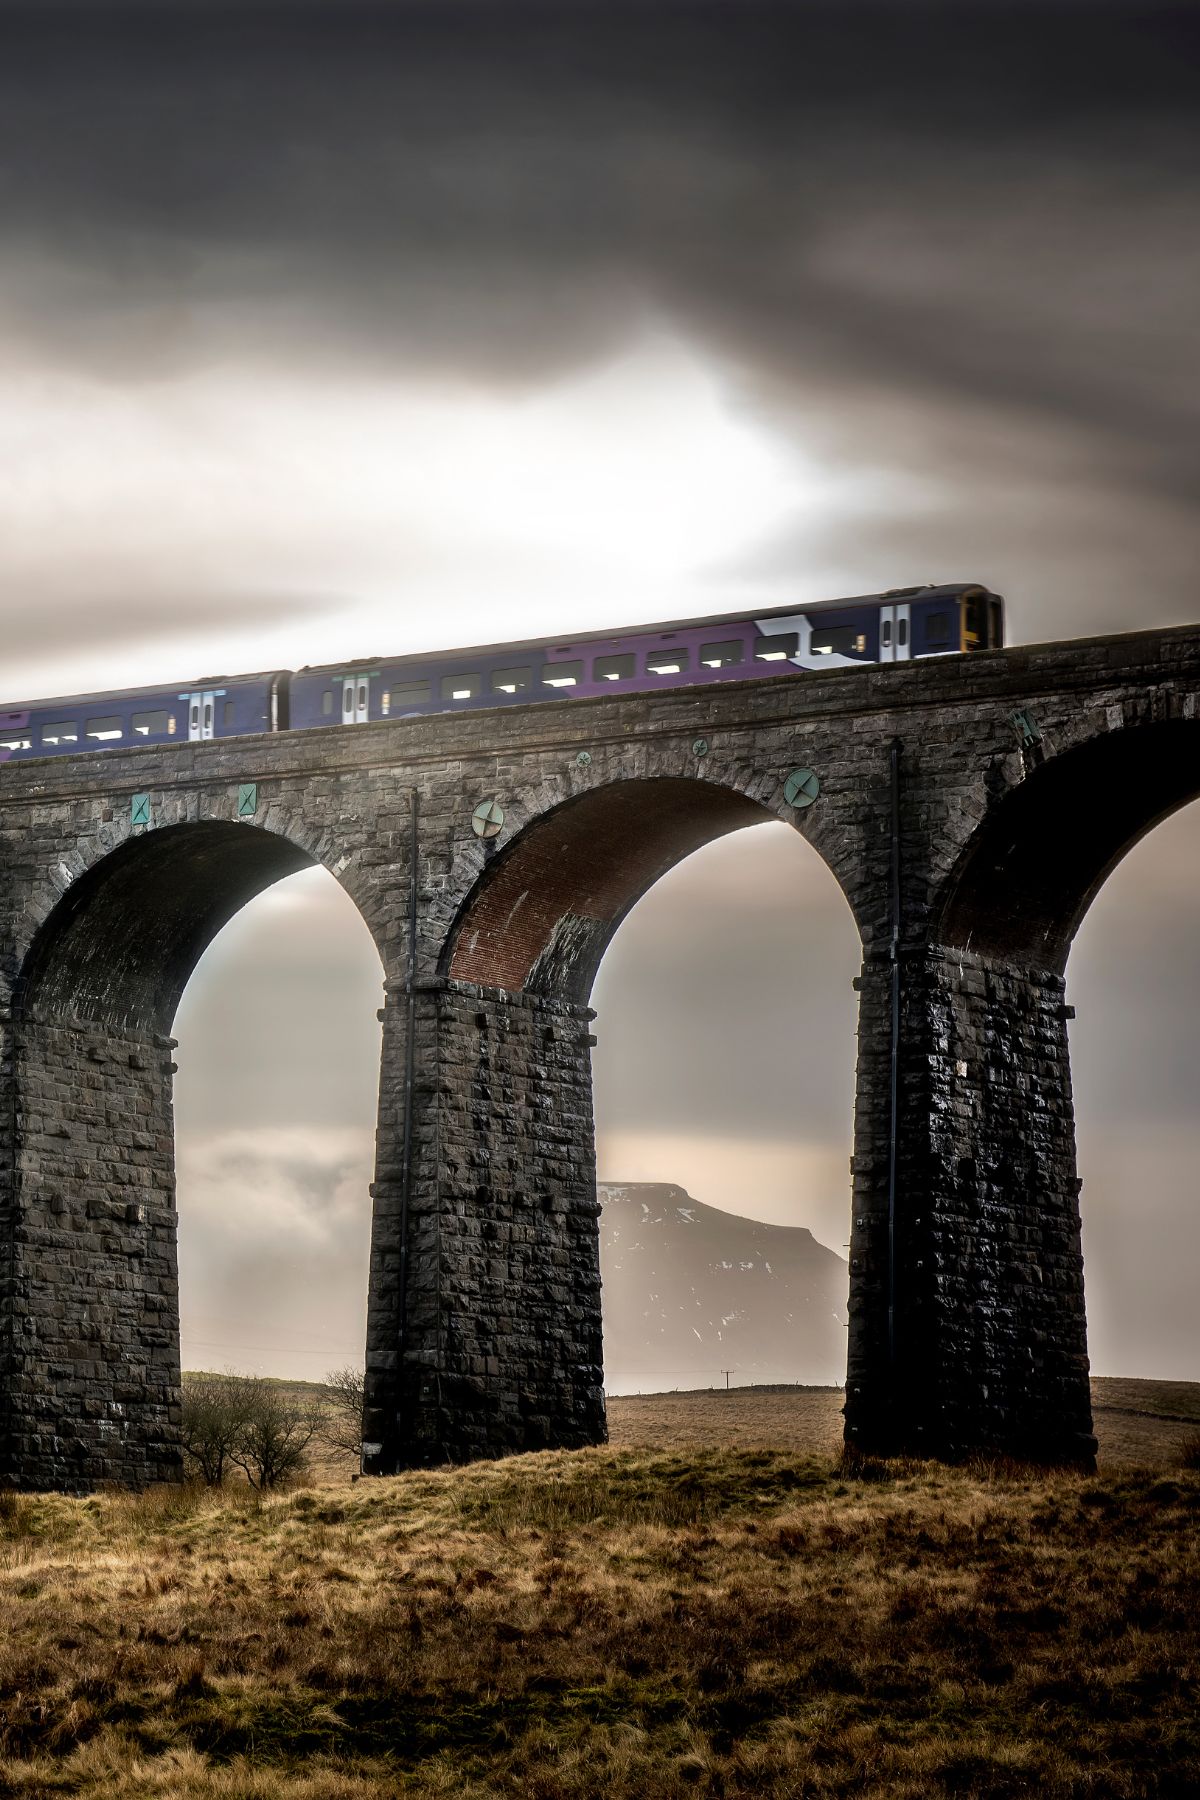 Train going over the Ribblehead viaduct in the Yorkshire Dales National Park